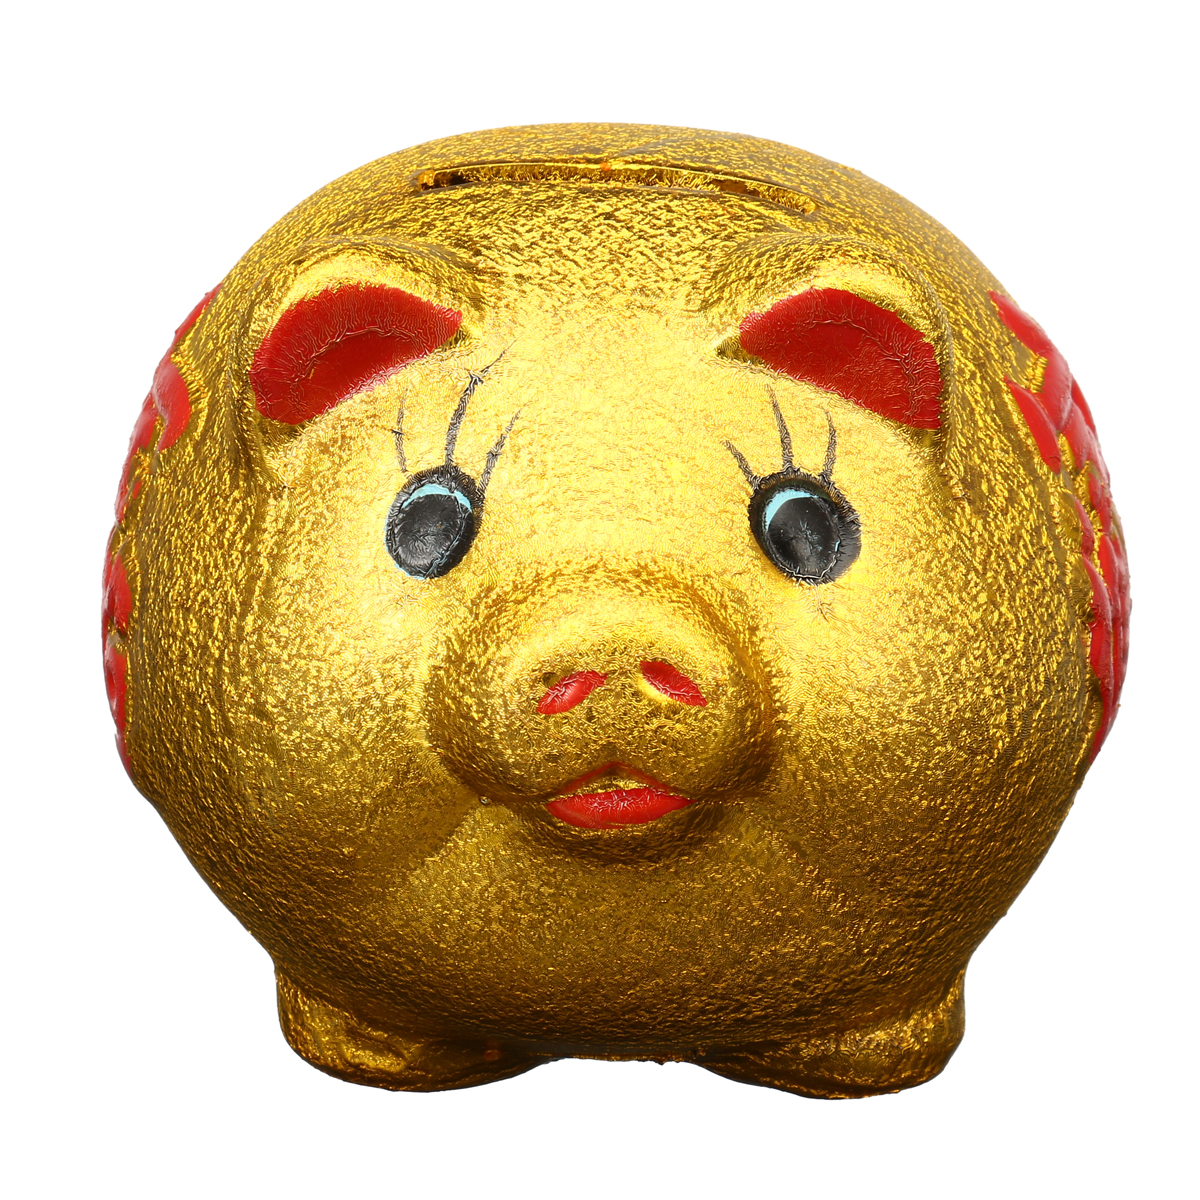 5-Gold-Ceramic-Piggy-Bank-Mini-Cute-Pig-Children-Coin-Collection-Gift-Decorations-1555224-2